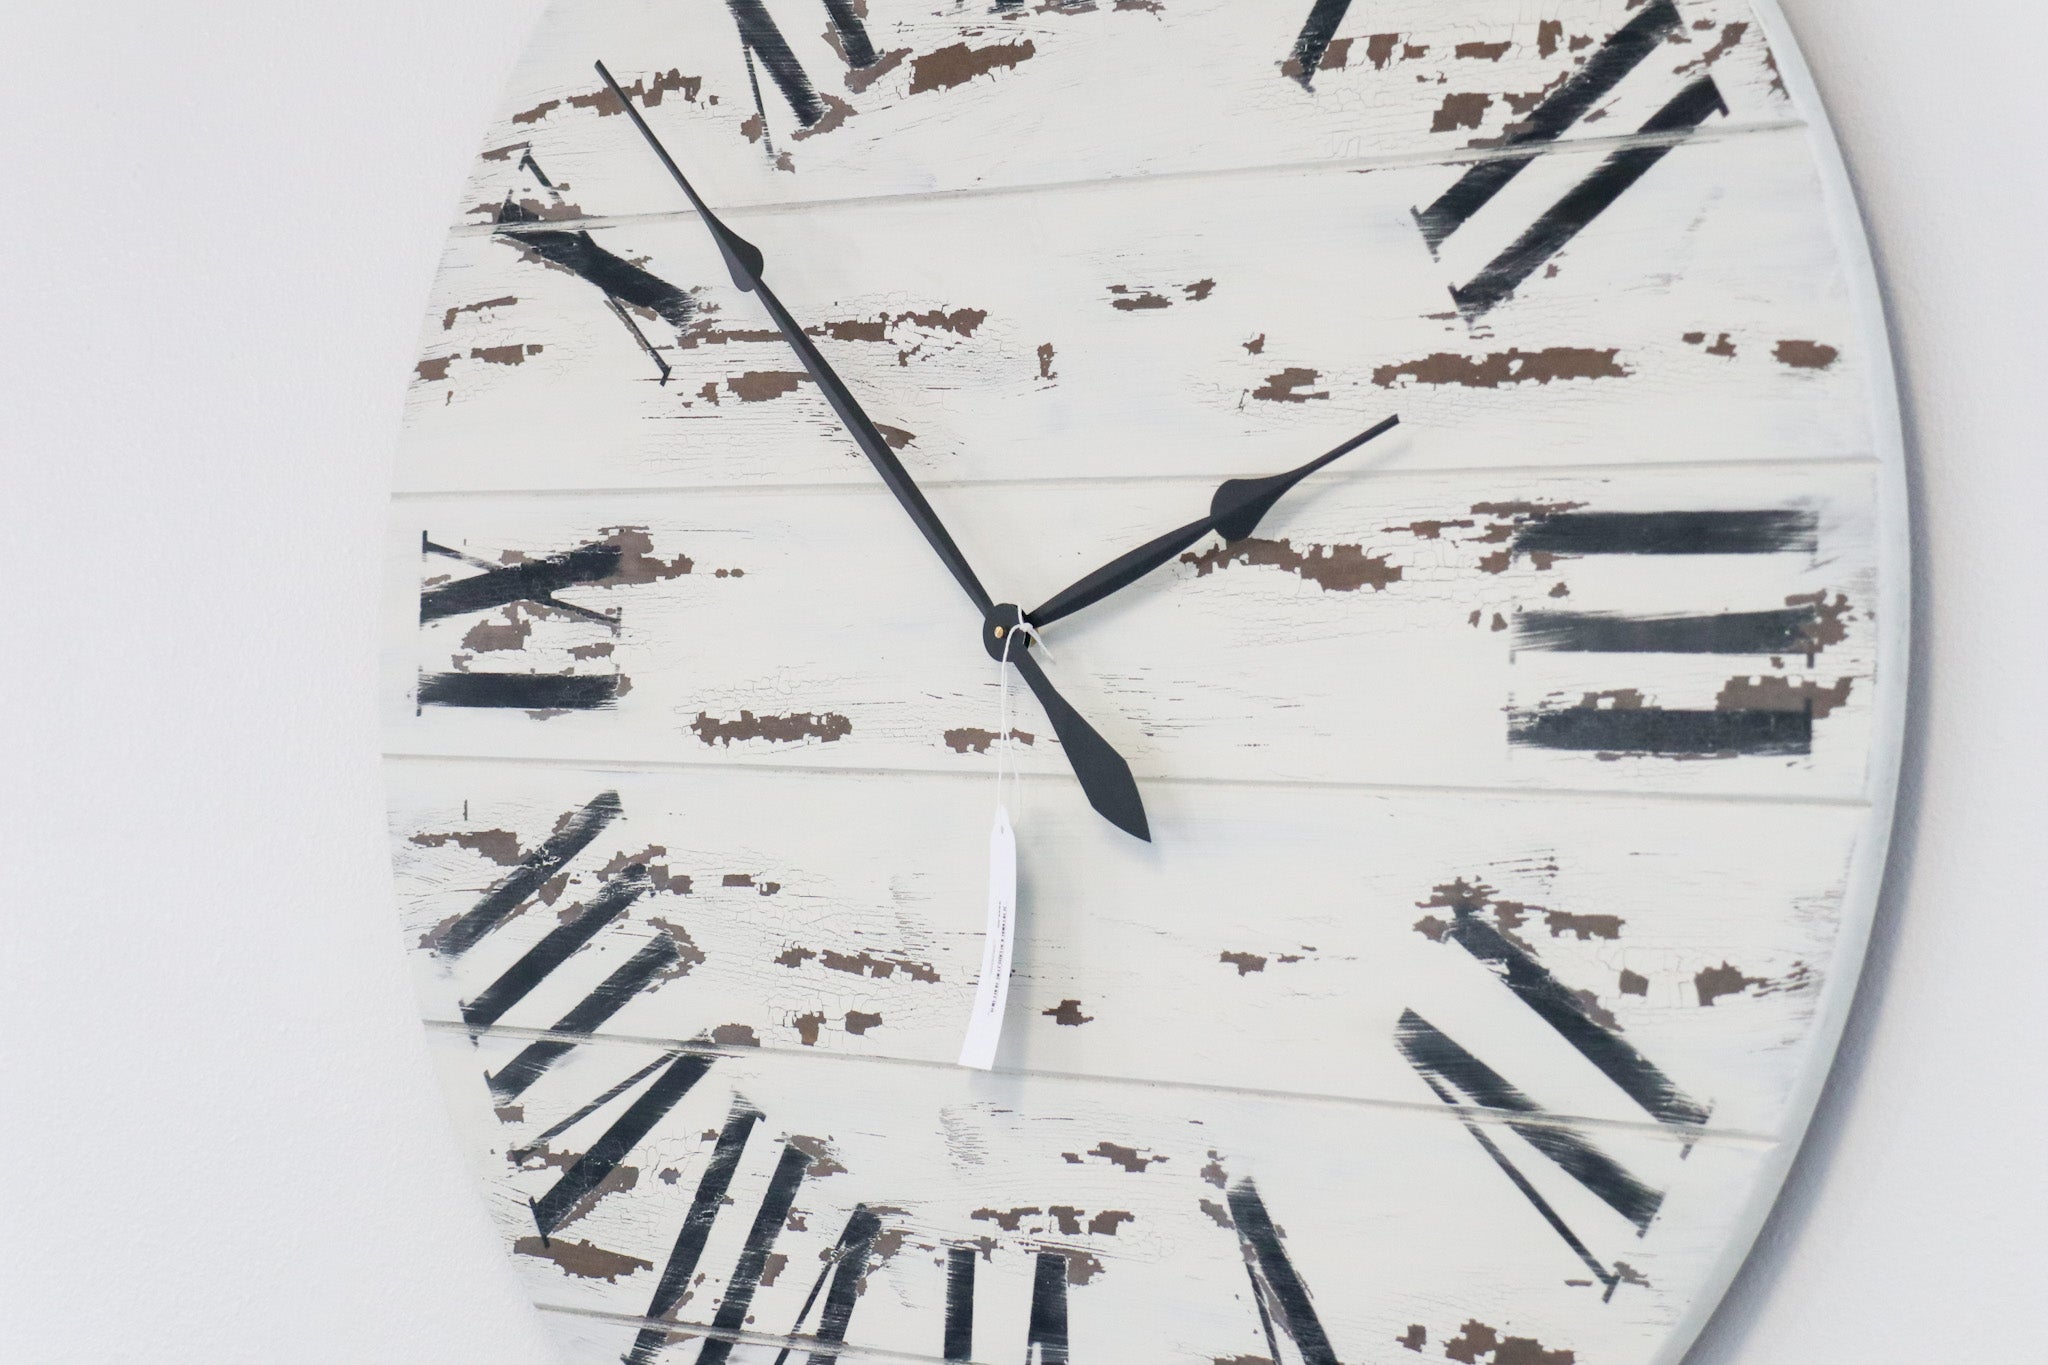 42&quot; Farmhouse Style Large White Distressed Wall Clock with Black Roman Numerals (in stock) - Hazel Oak Farms